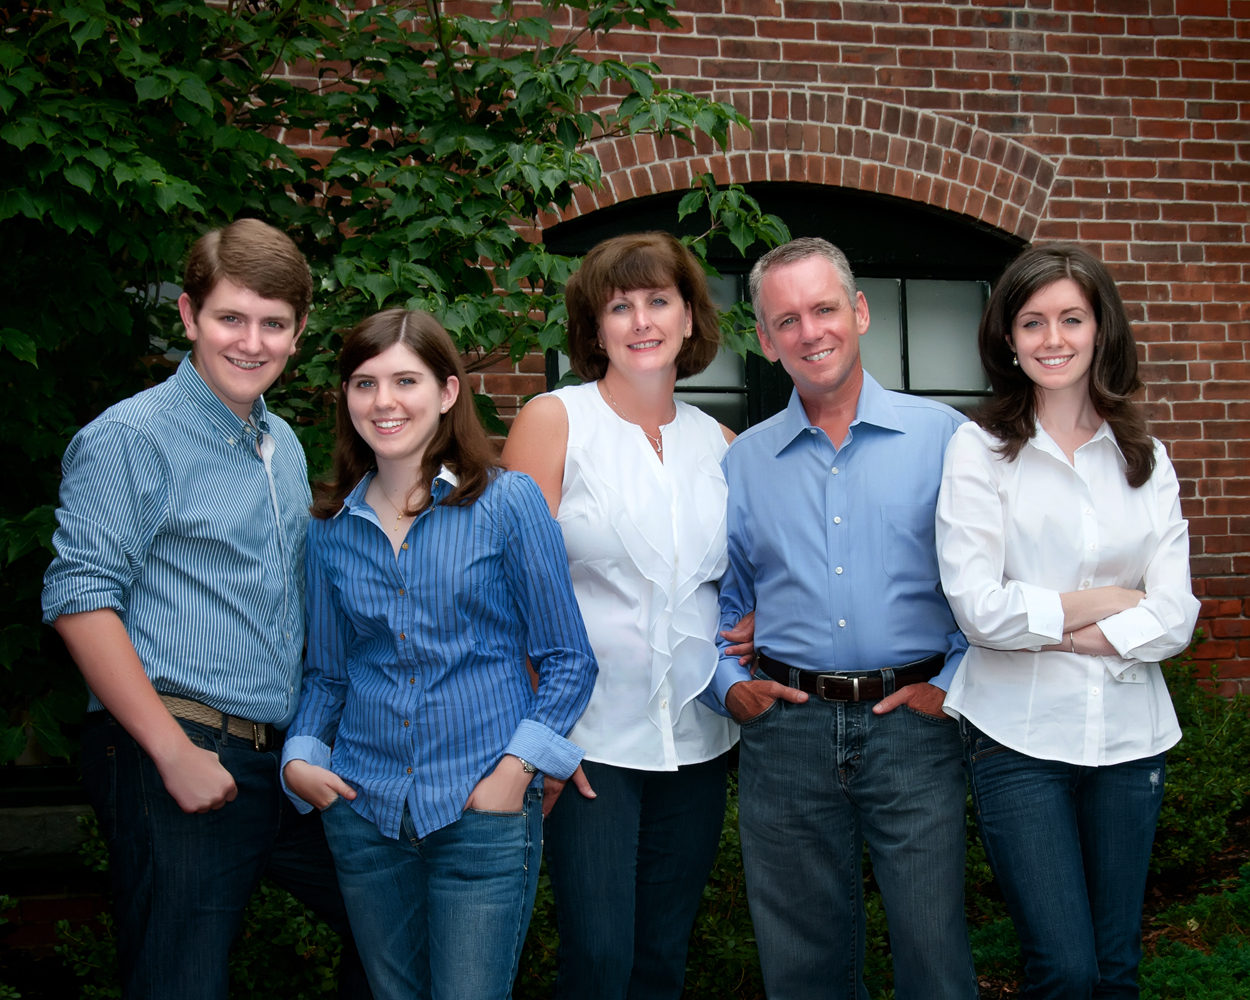 Rep. Roy and his family